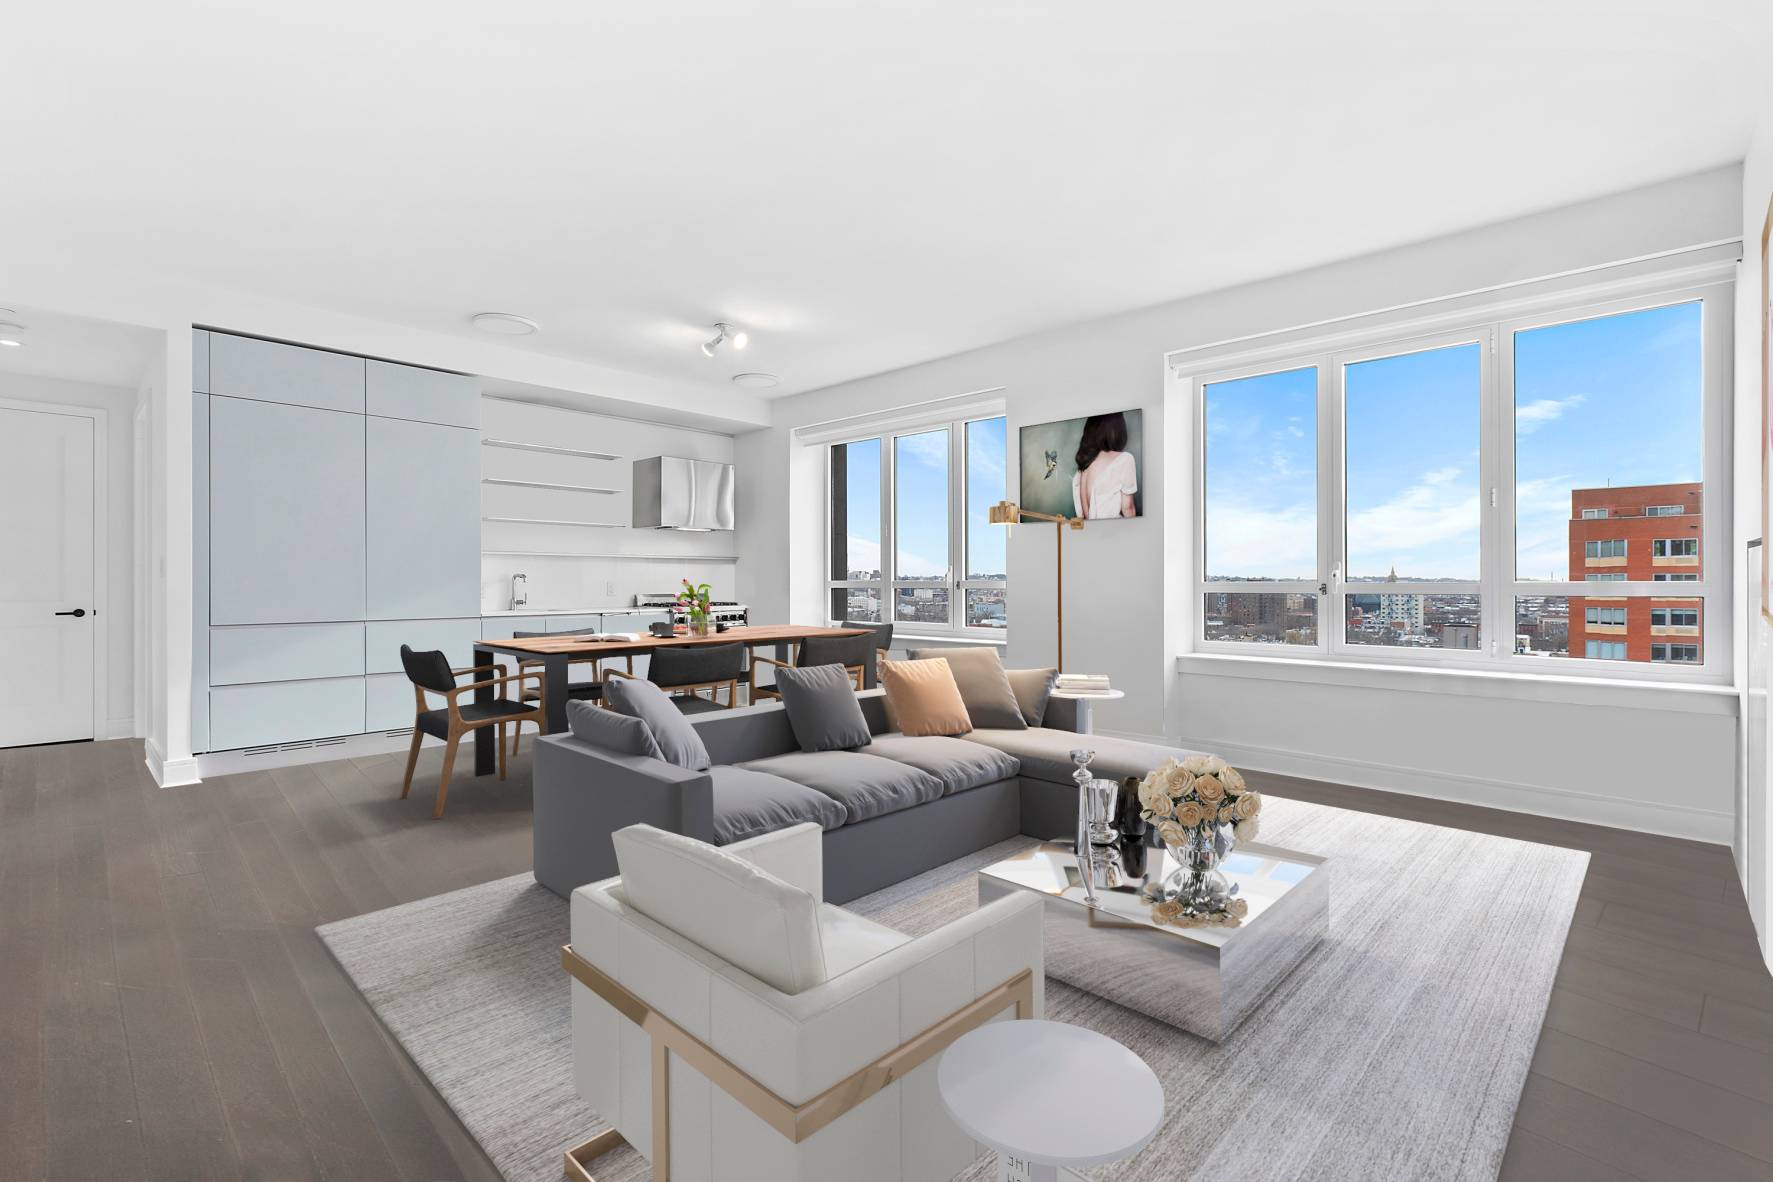 Residence 1111 is an oversized two bedroom, two bathroom home boasting an intelligent layout and protected southern views of Boerum Hill from both bedrooms and the living dining area.